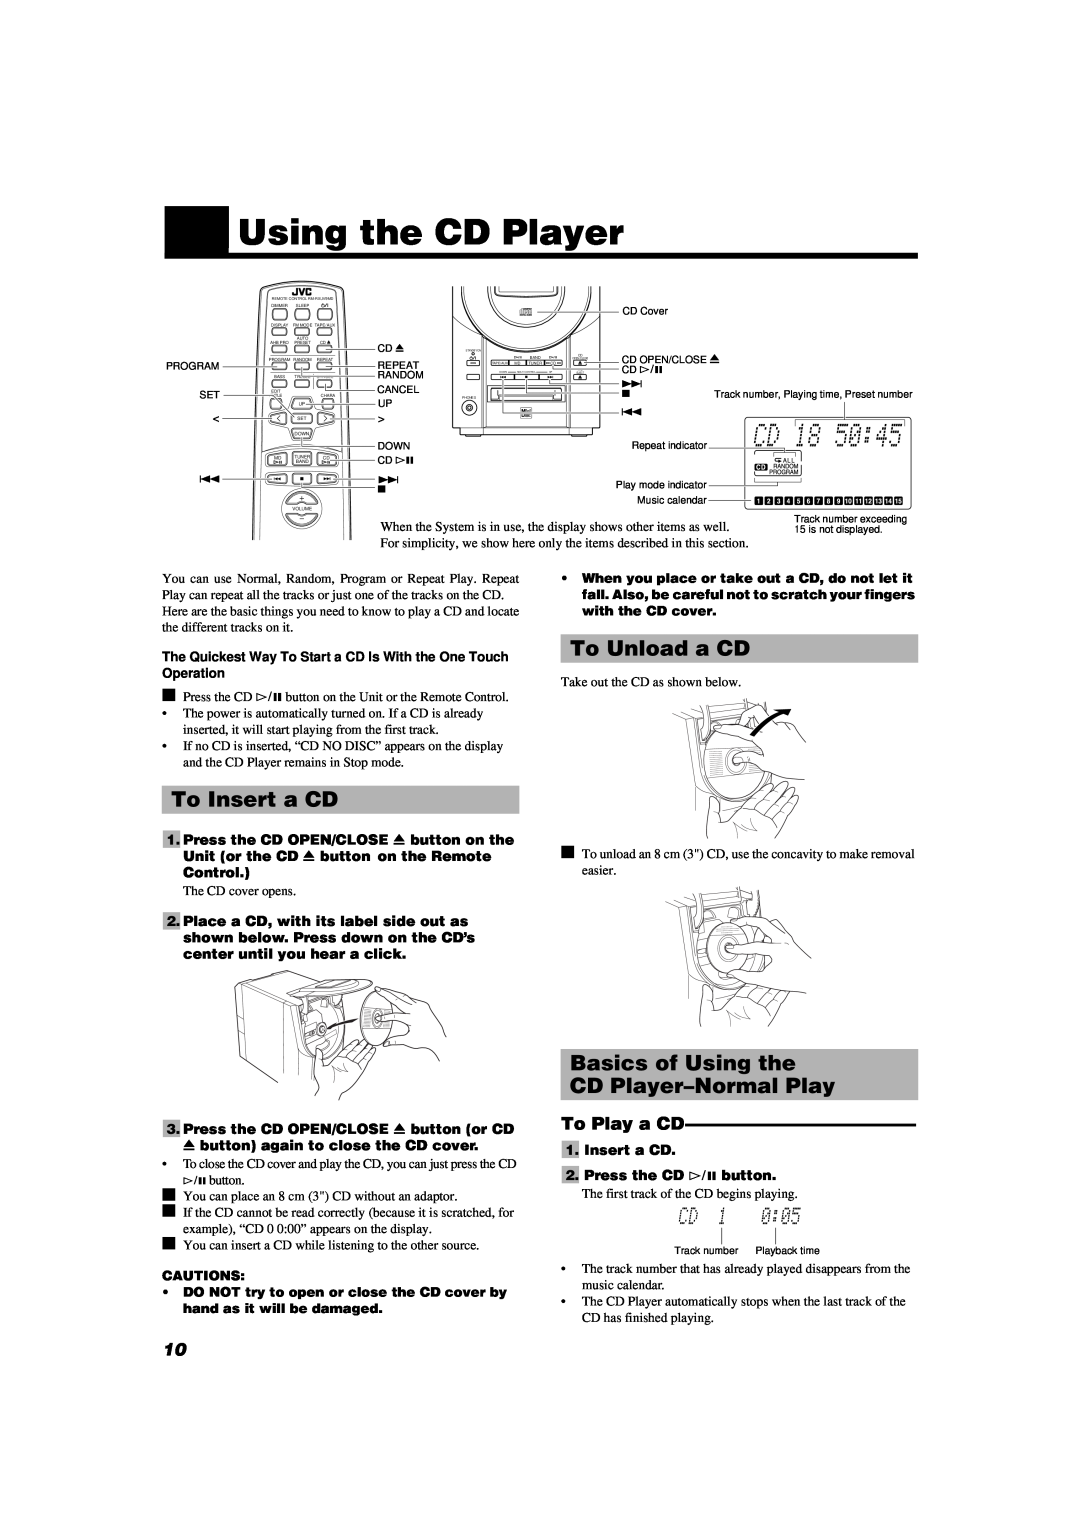 JVC UX-V9MD To Insert a CD, To Unload a CD, Basics of Using the CD Player-Normal Play, To Play a CD, Control, Cautions 